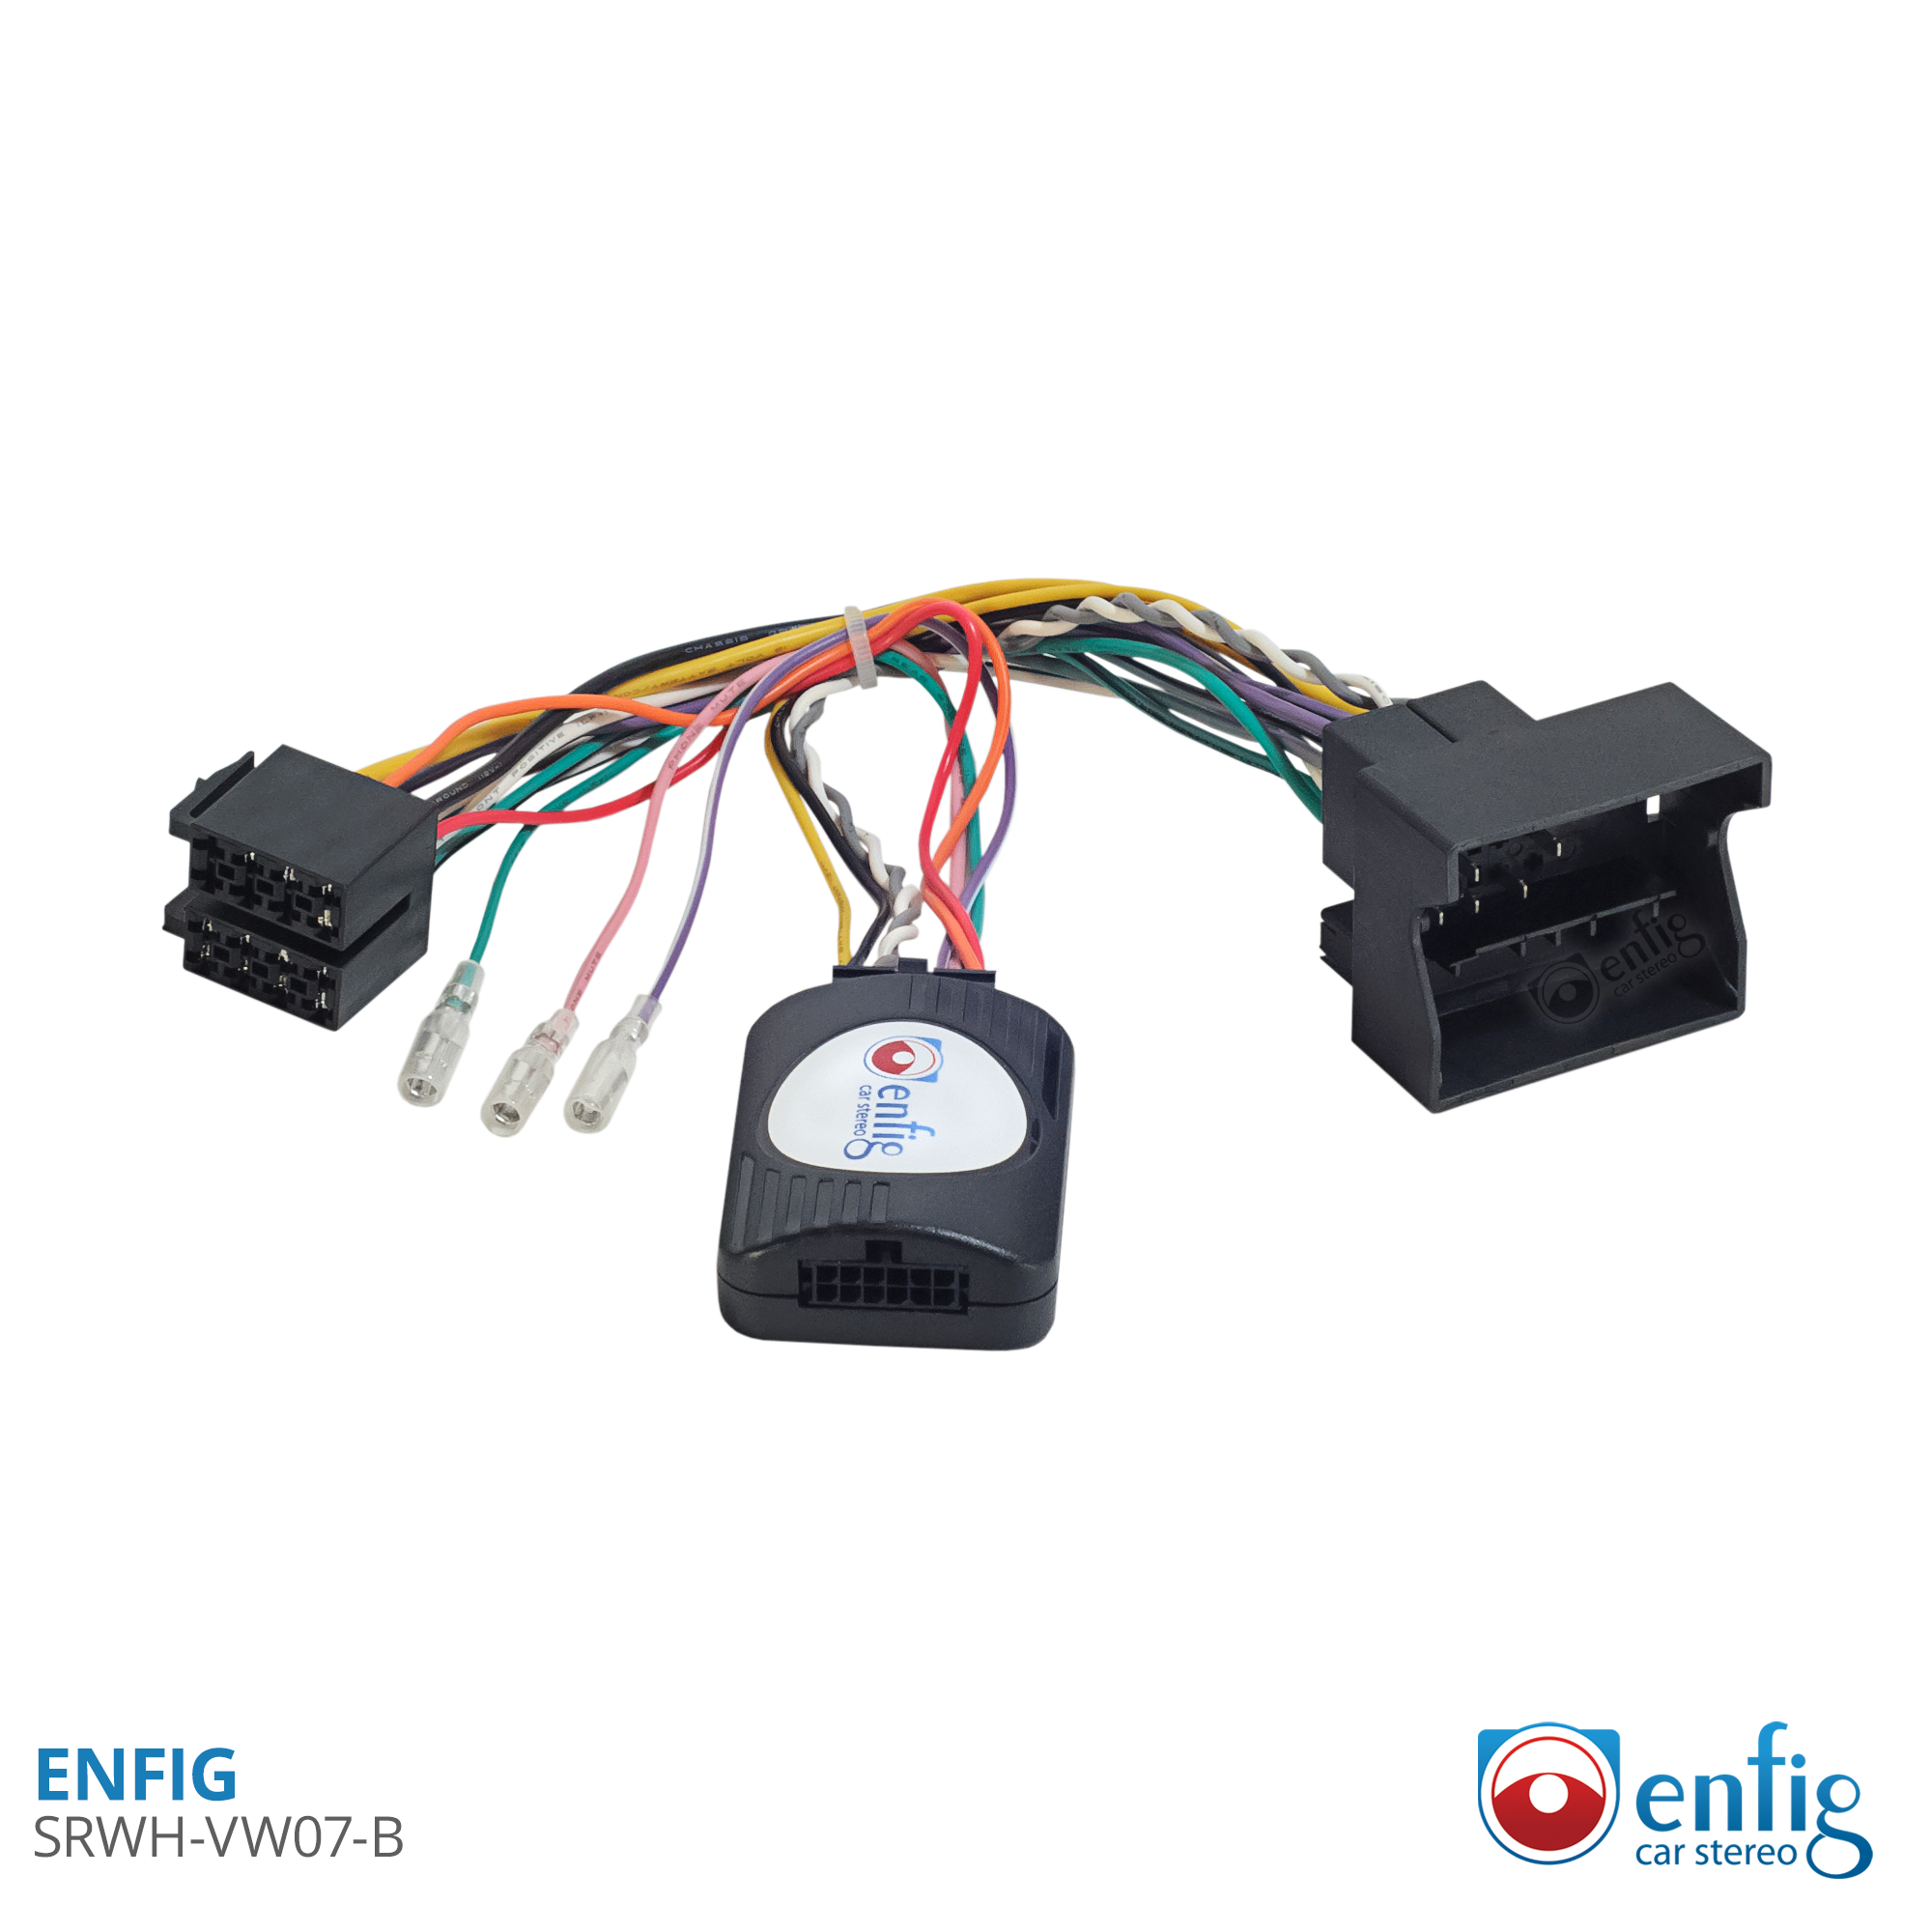 Enfig SRWH-VW07-B Volkswagen radio wiring harness with Can Bus interface  and Steering wheel control interface – Enfig Car Stereo